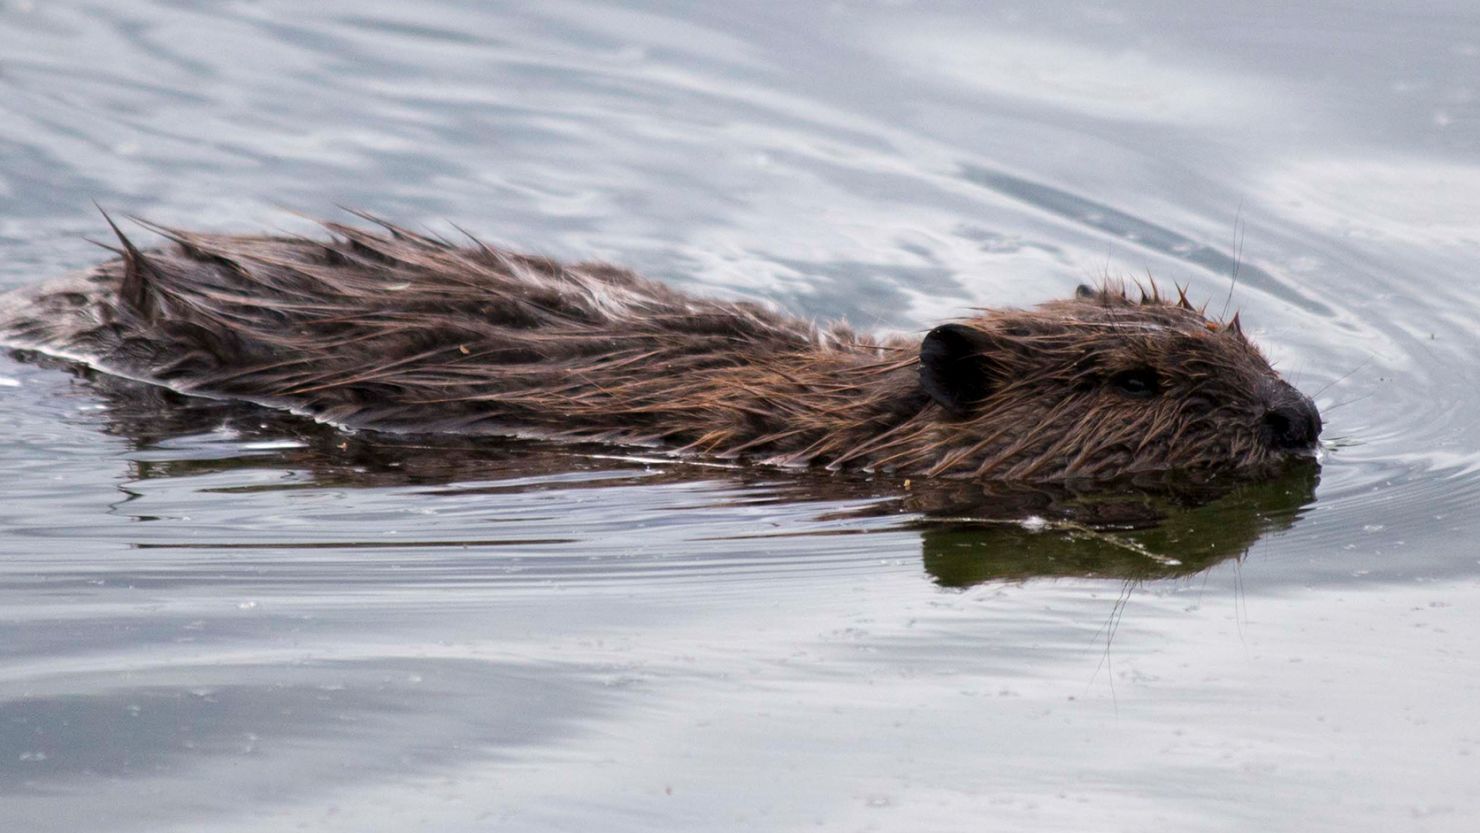 A beaver swims in a pond near the Tonsina River, Alaska. The master builders are enjoying a dam-building boom in parts of the Alaskan tundra where they previously haven't been established.